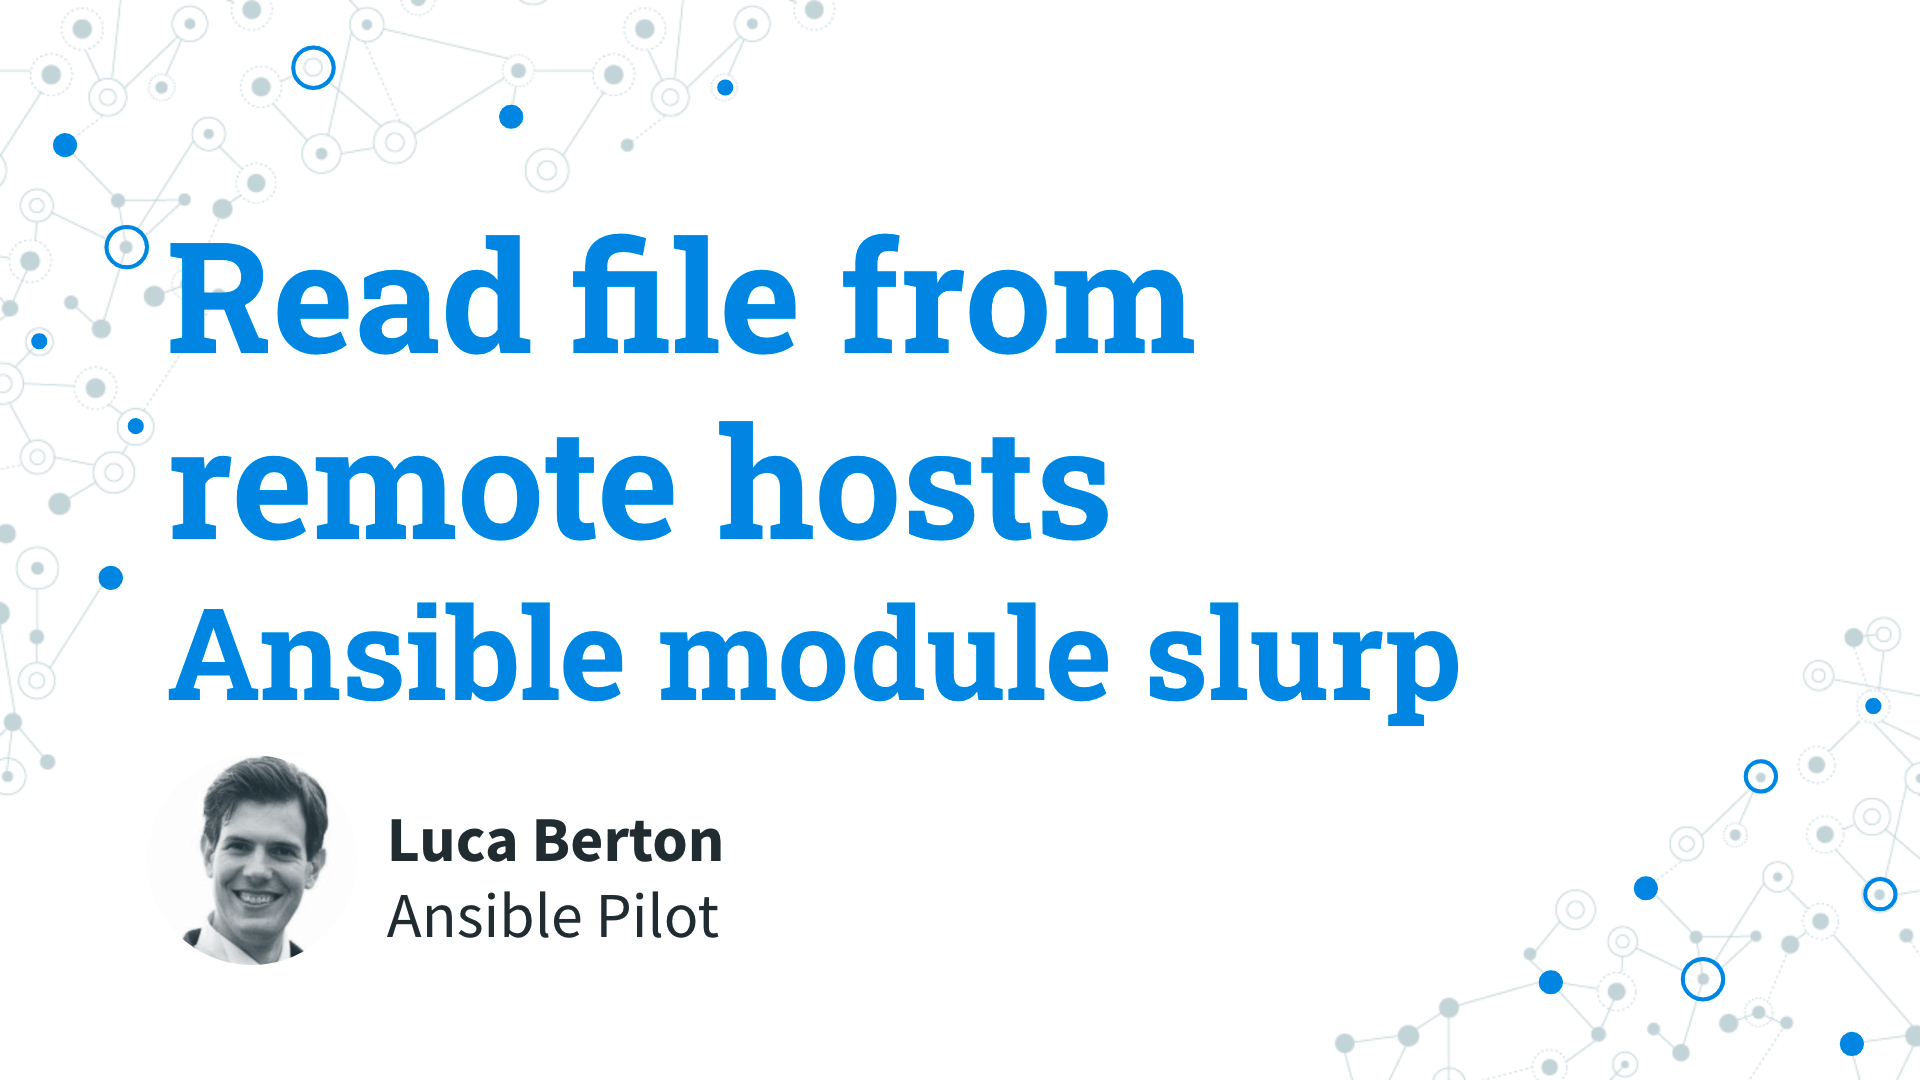 Read file from remote hosts - Ansible module slurp